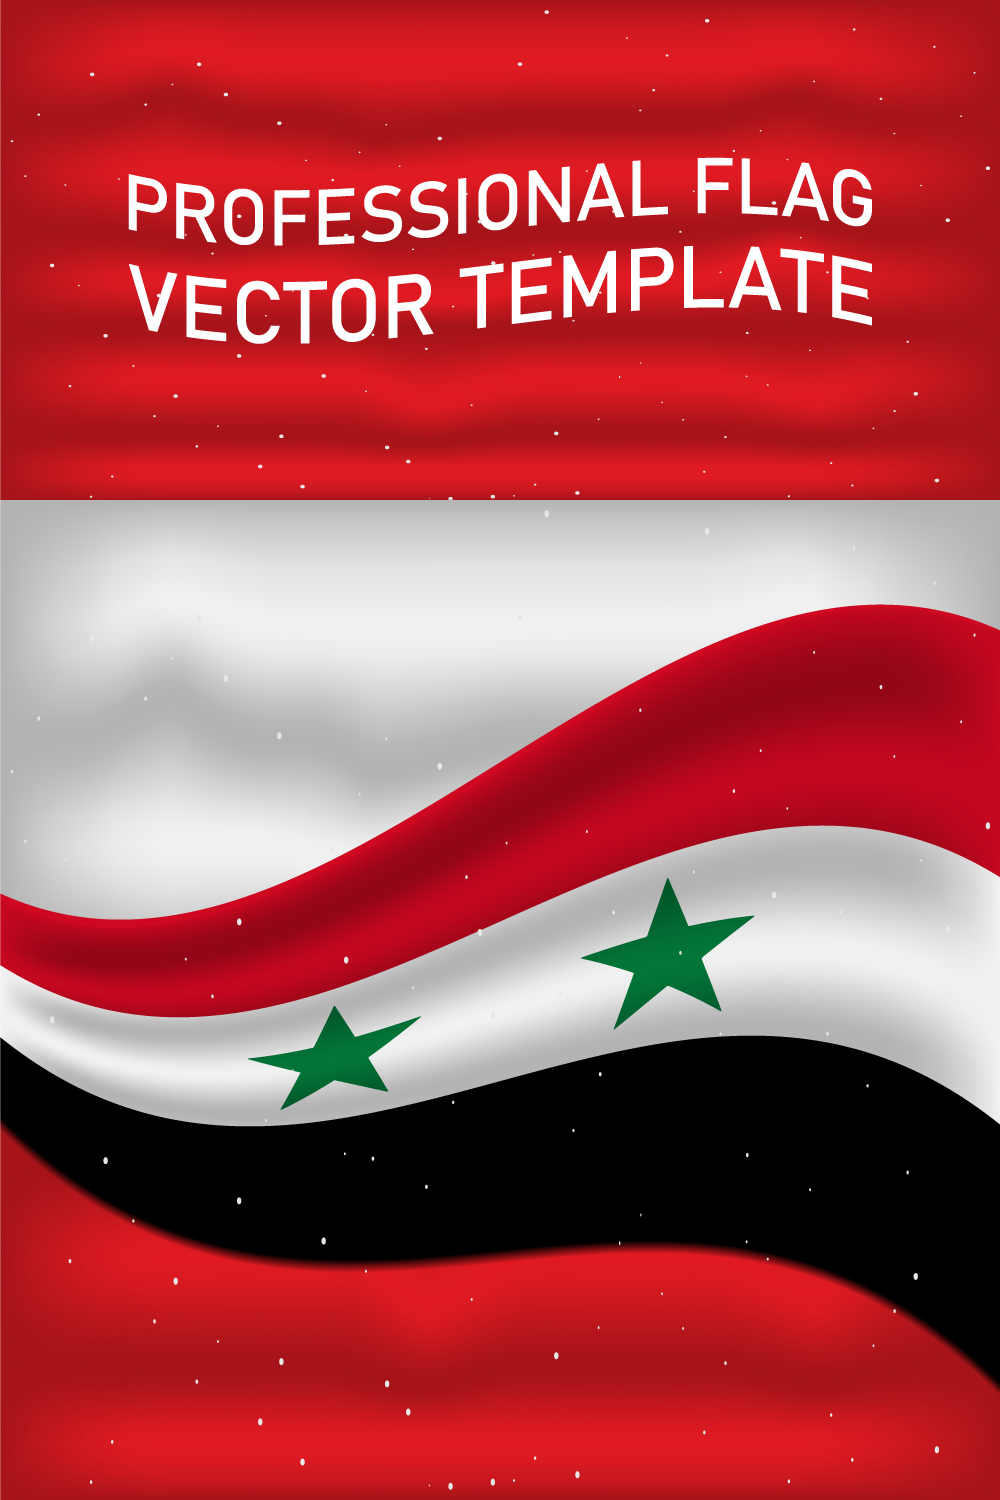 Enchanting image of the flag of Syria.